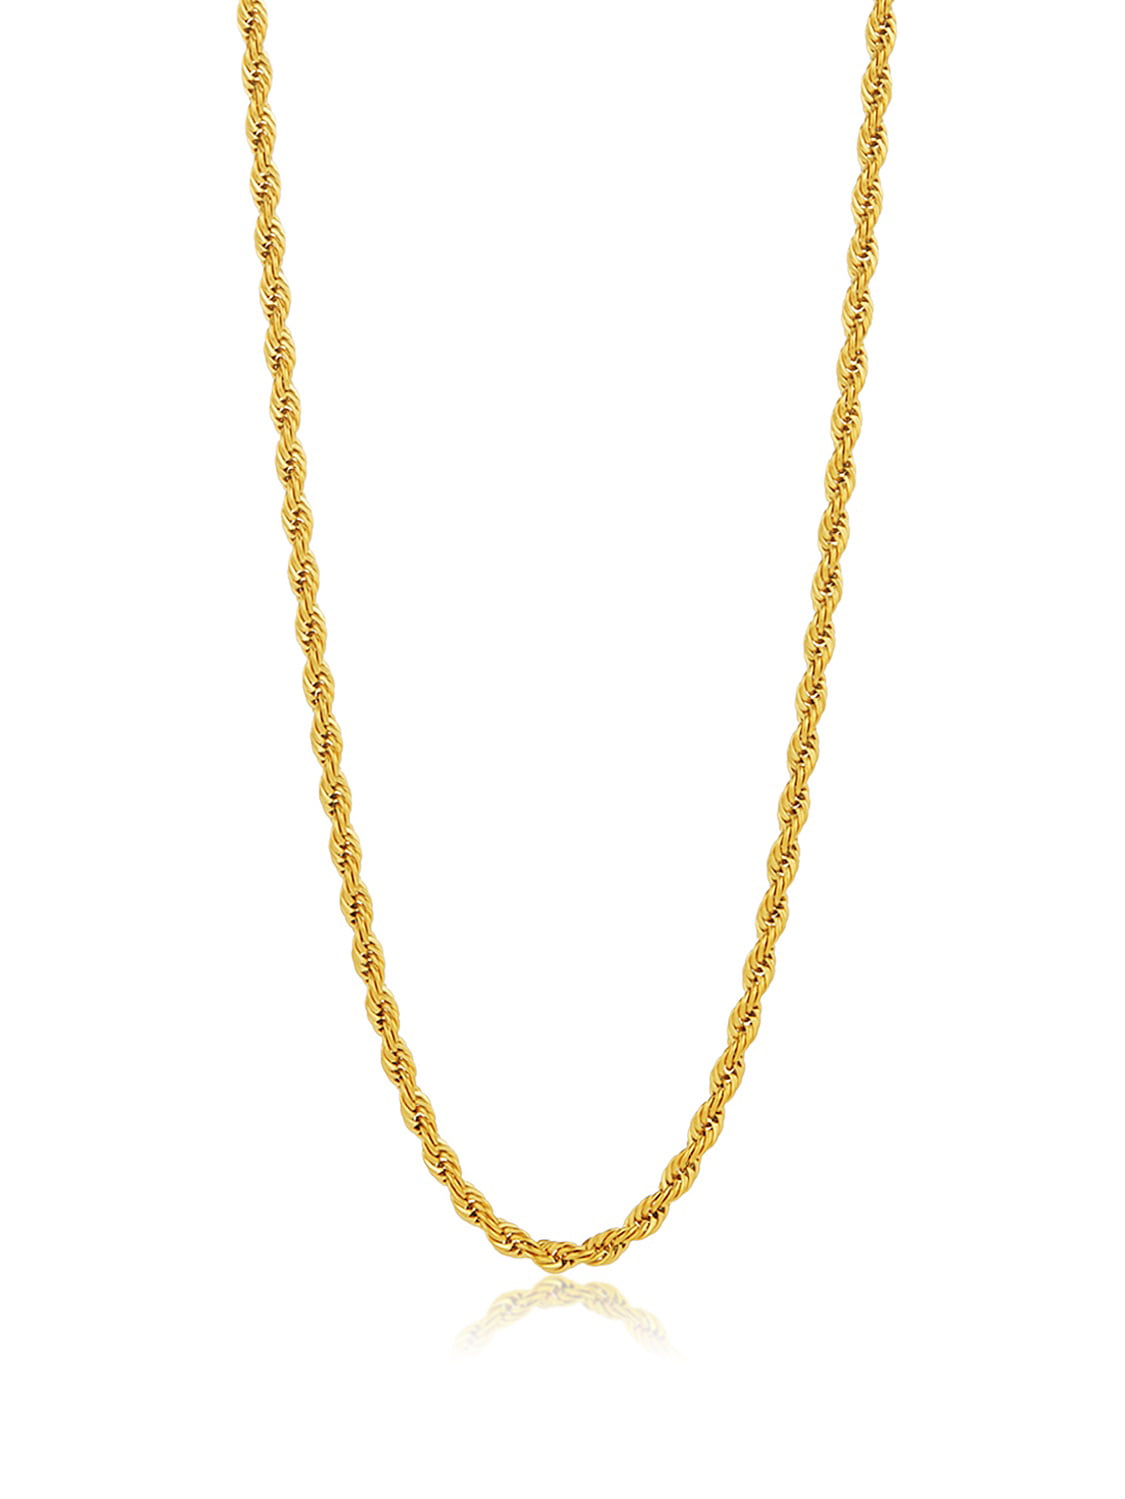 5.9mm 24k Yellow Gold Plated Stainless Steel Twisted Rope Chain Necklace, 30 inches